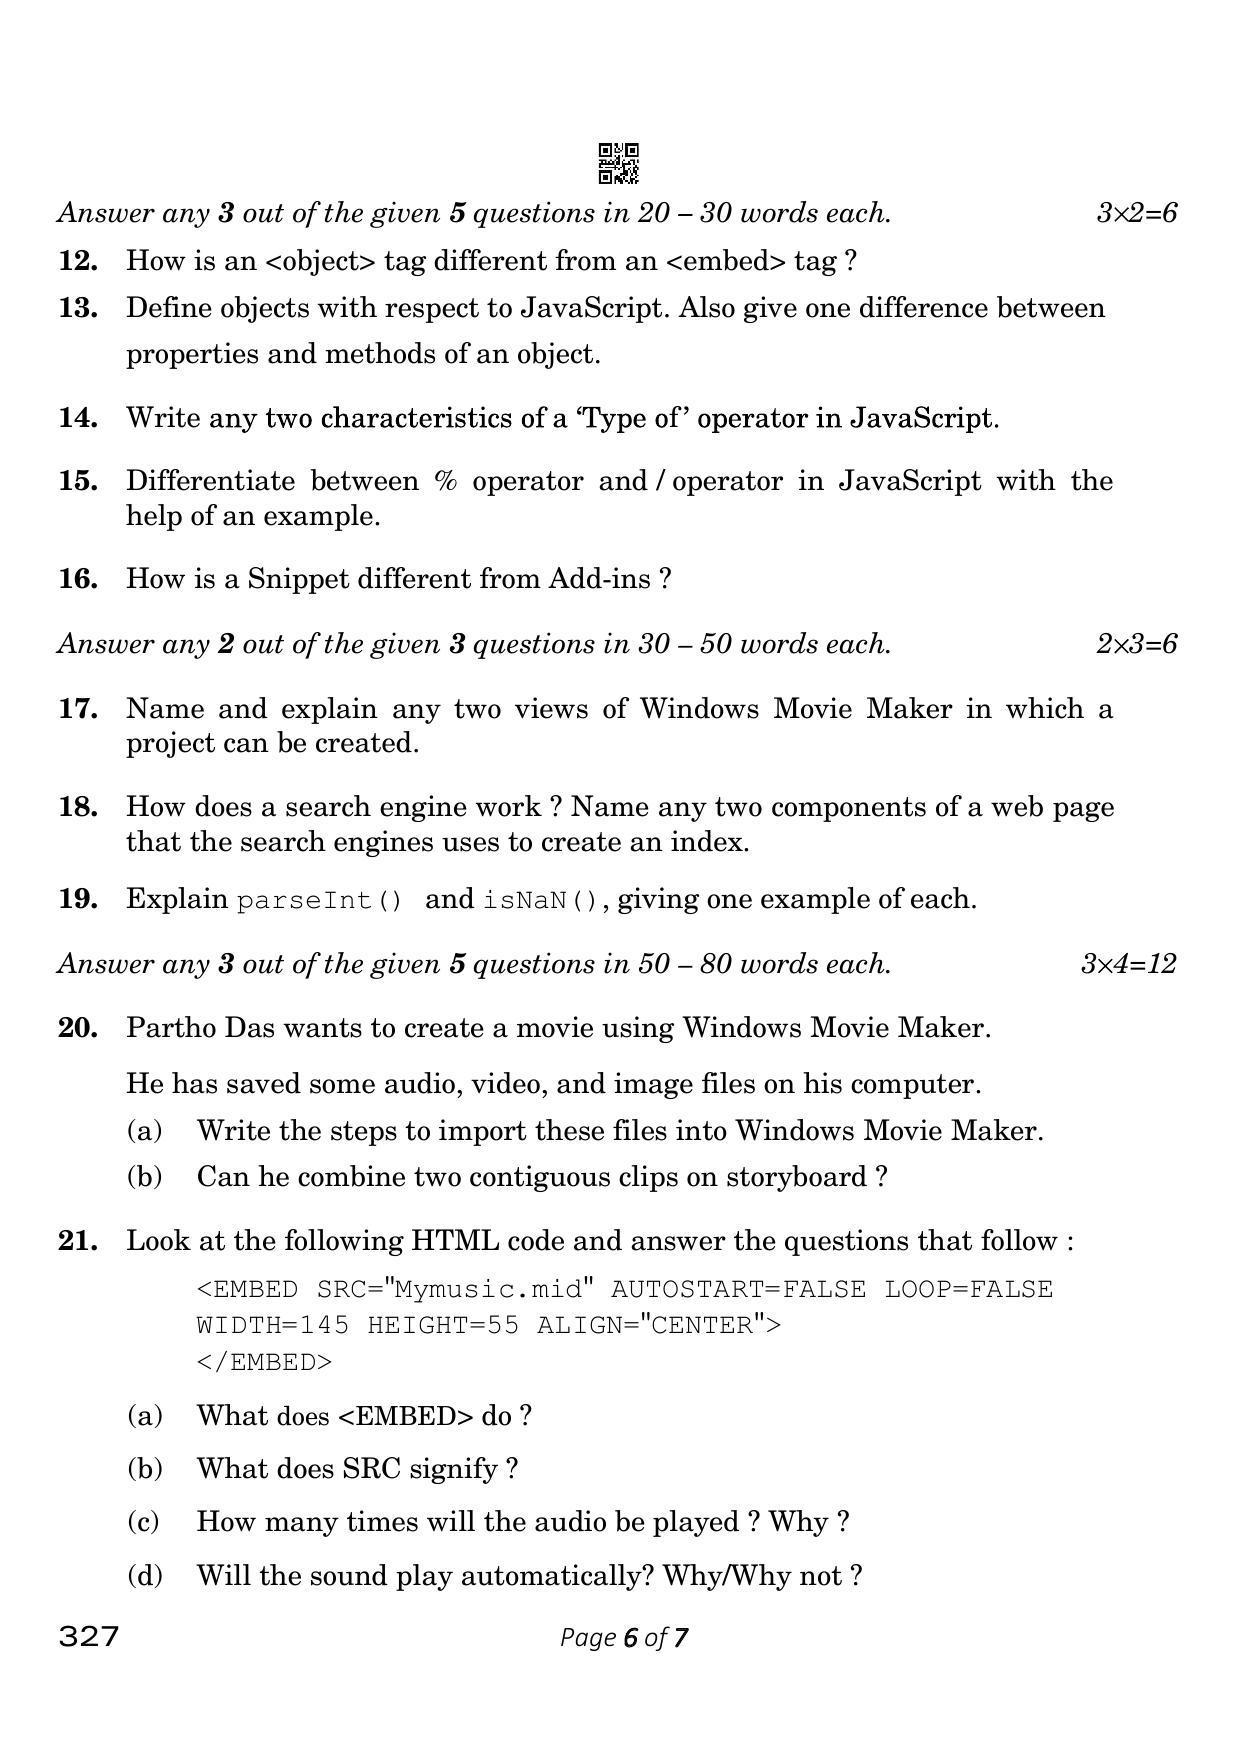 CBSE Class 12 327 Web Applications 2023 Question Paper - Page 6